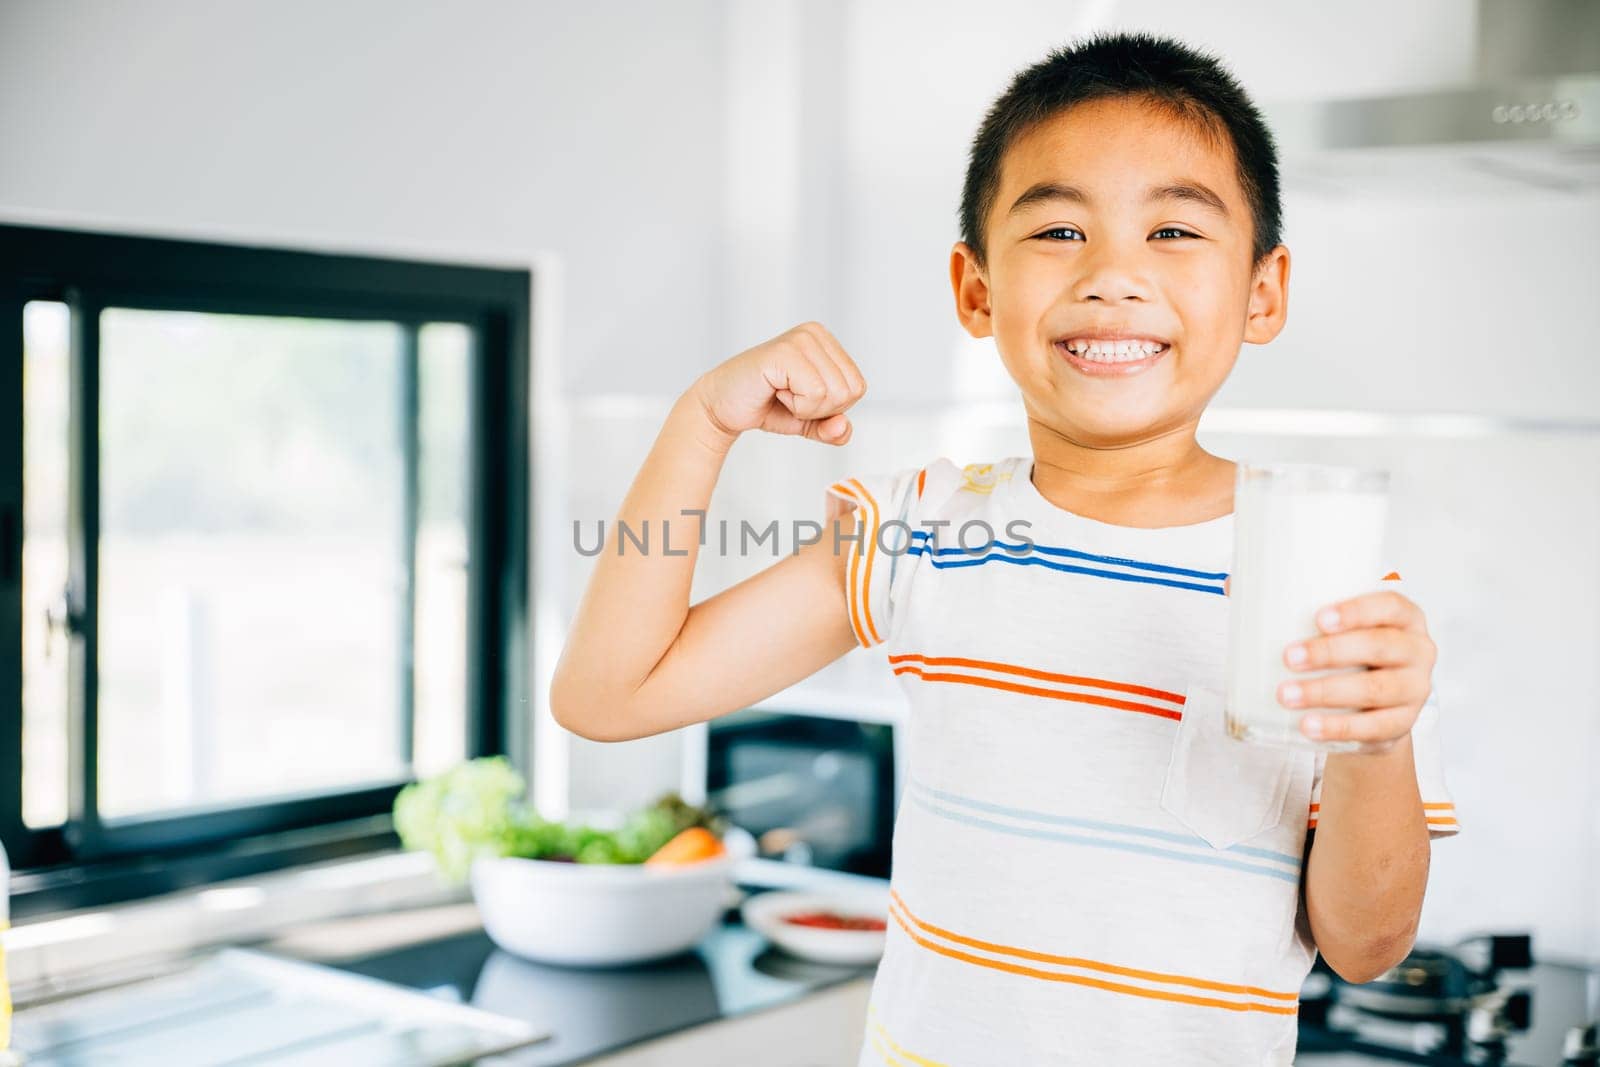 Portrait of smiling Asian little boy holding milk in kitchen. Cute son enjoys drink, radiating joy. Preschool child savoring calcium-rich liquid, feeling happy at home give me.